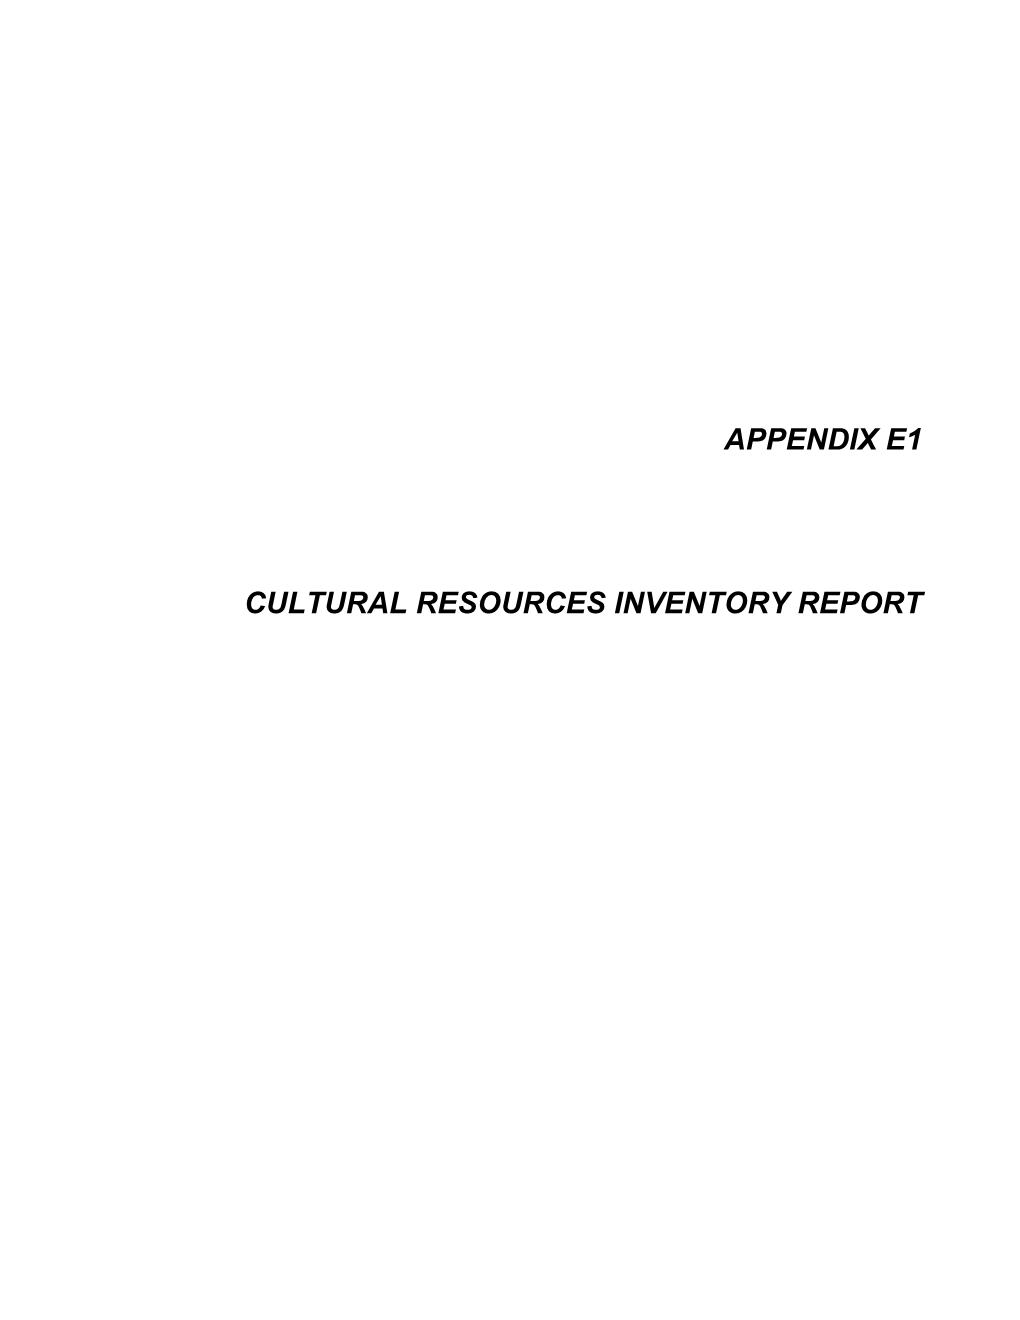 Cultural Resources Inventory Report and Addendum